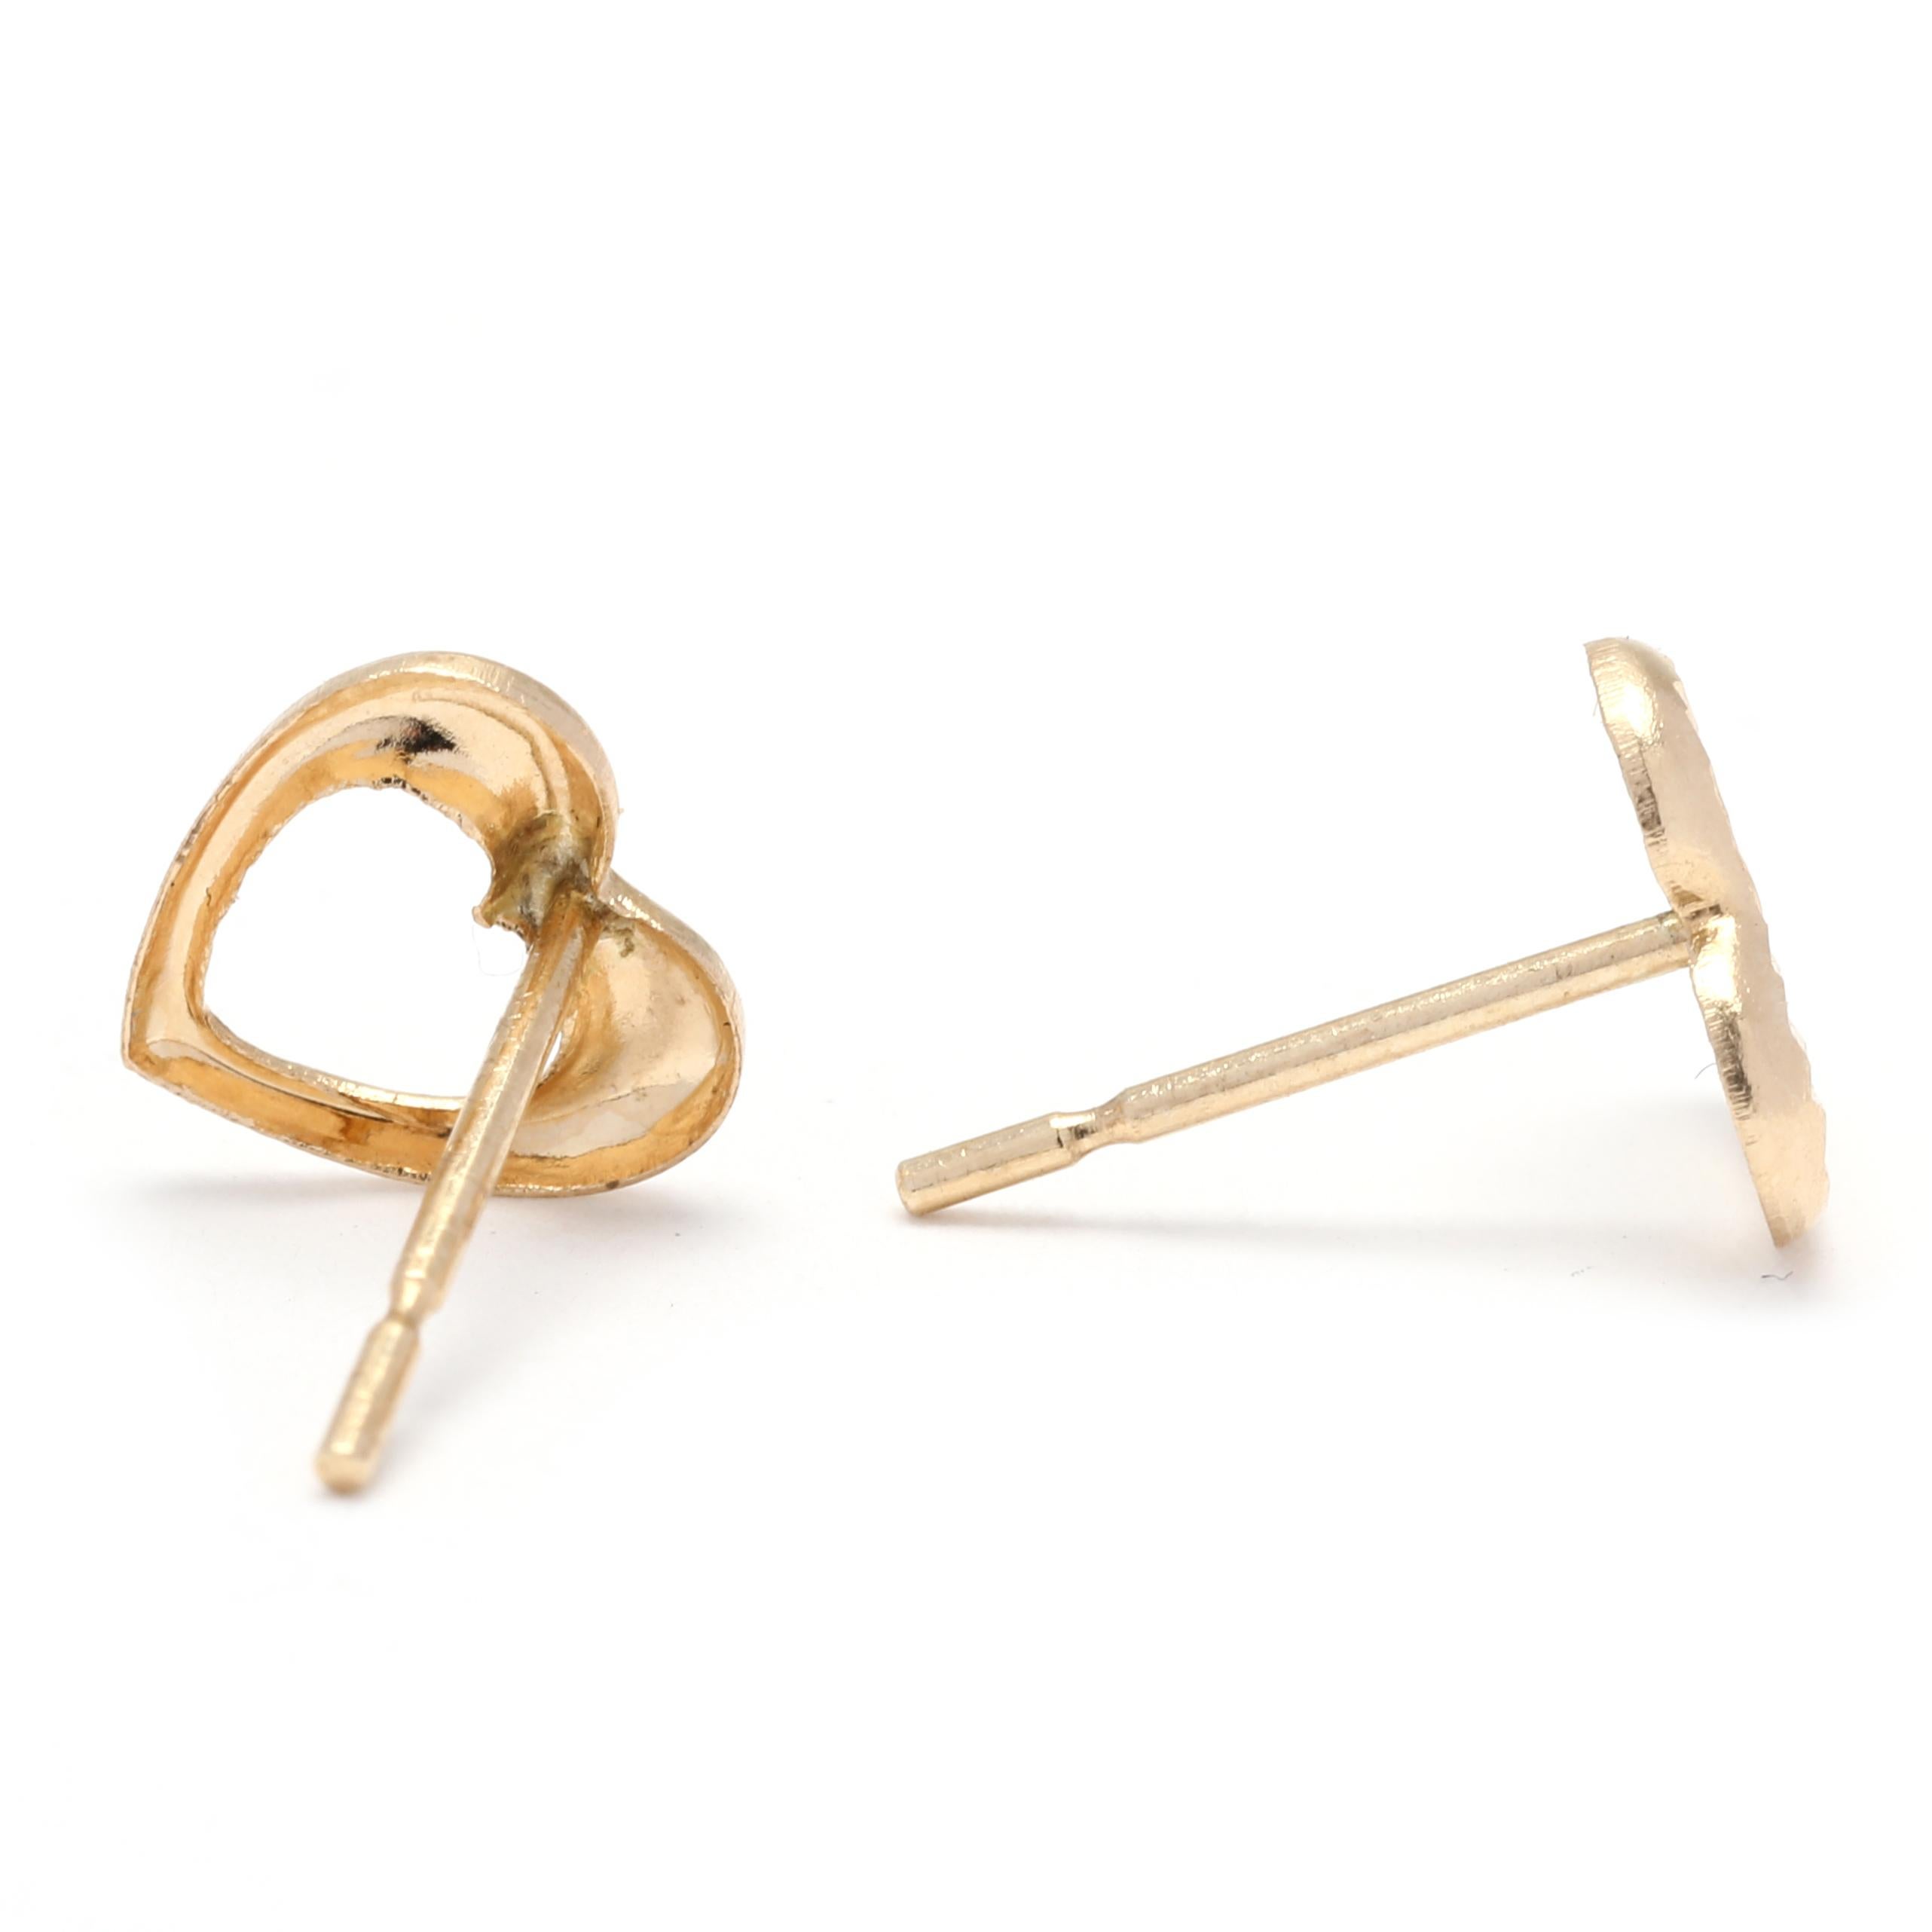 These adorable Mini Textured Heart Stud Earrings are the perfect addition to any jewelry collection. Made from 14K yellow gold, these small gold heart earrings are both elegant and versatile. With a length of just 1/4 inch, they are subtle and